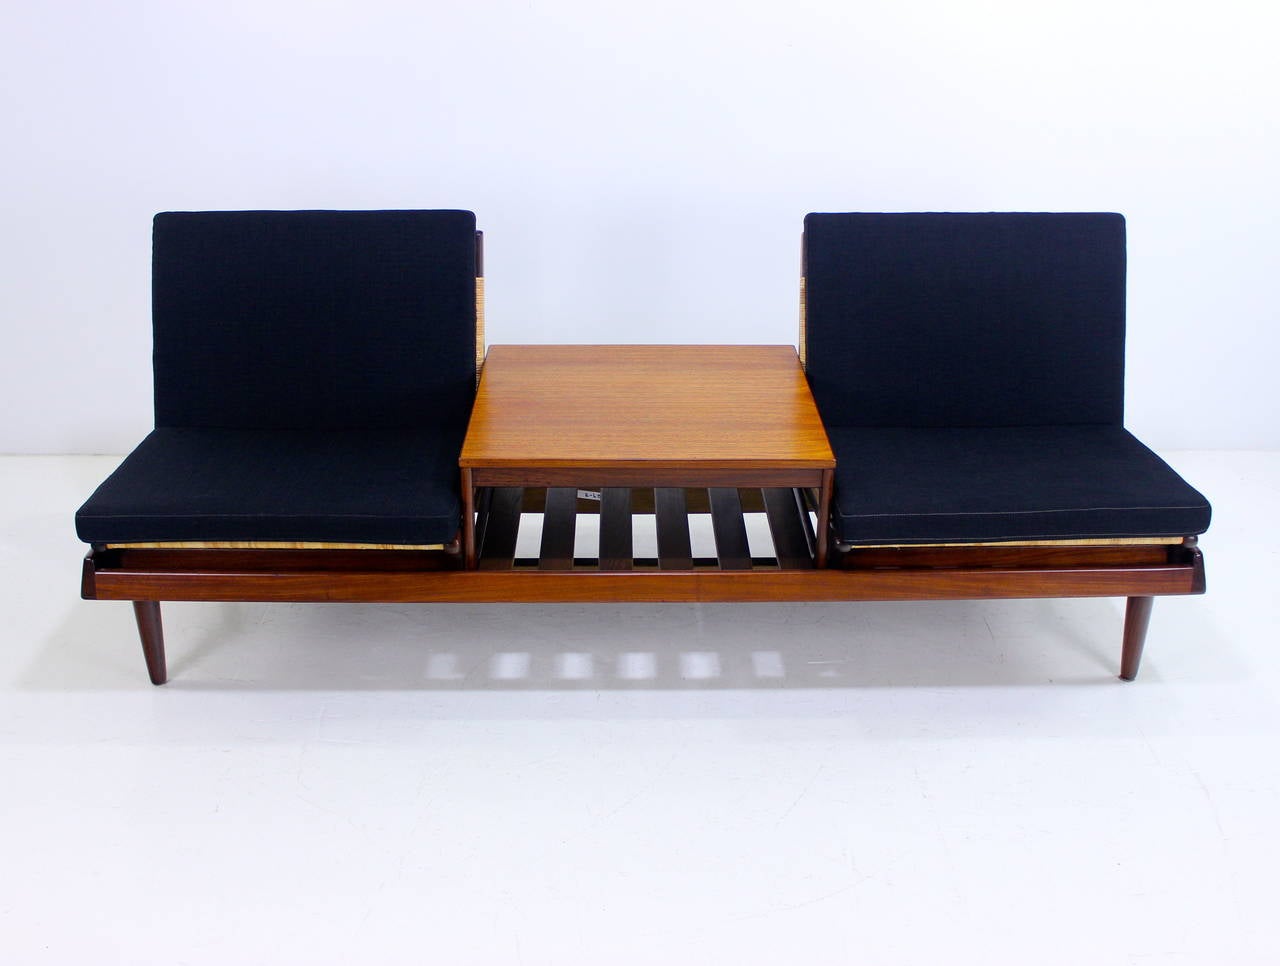 Danish modern modular seating group designed by Hans Olsen, model TV161.
Bramin, maker.
Rich teak and caning with steel and oak bracing for timeless style and durability.
Two stand alone caned chairs and one table measuring 24